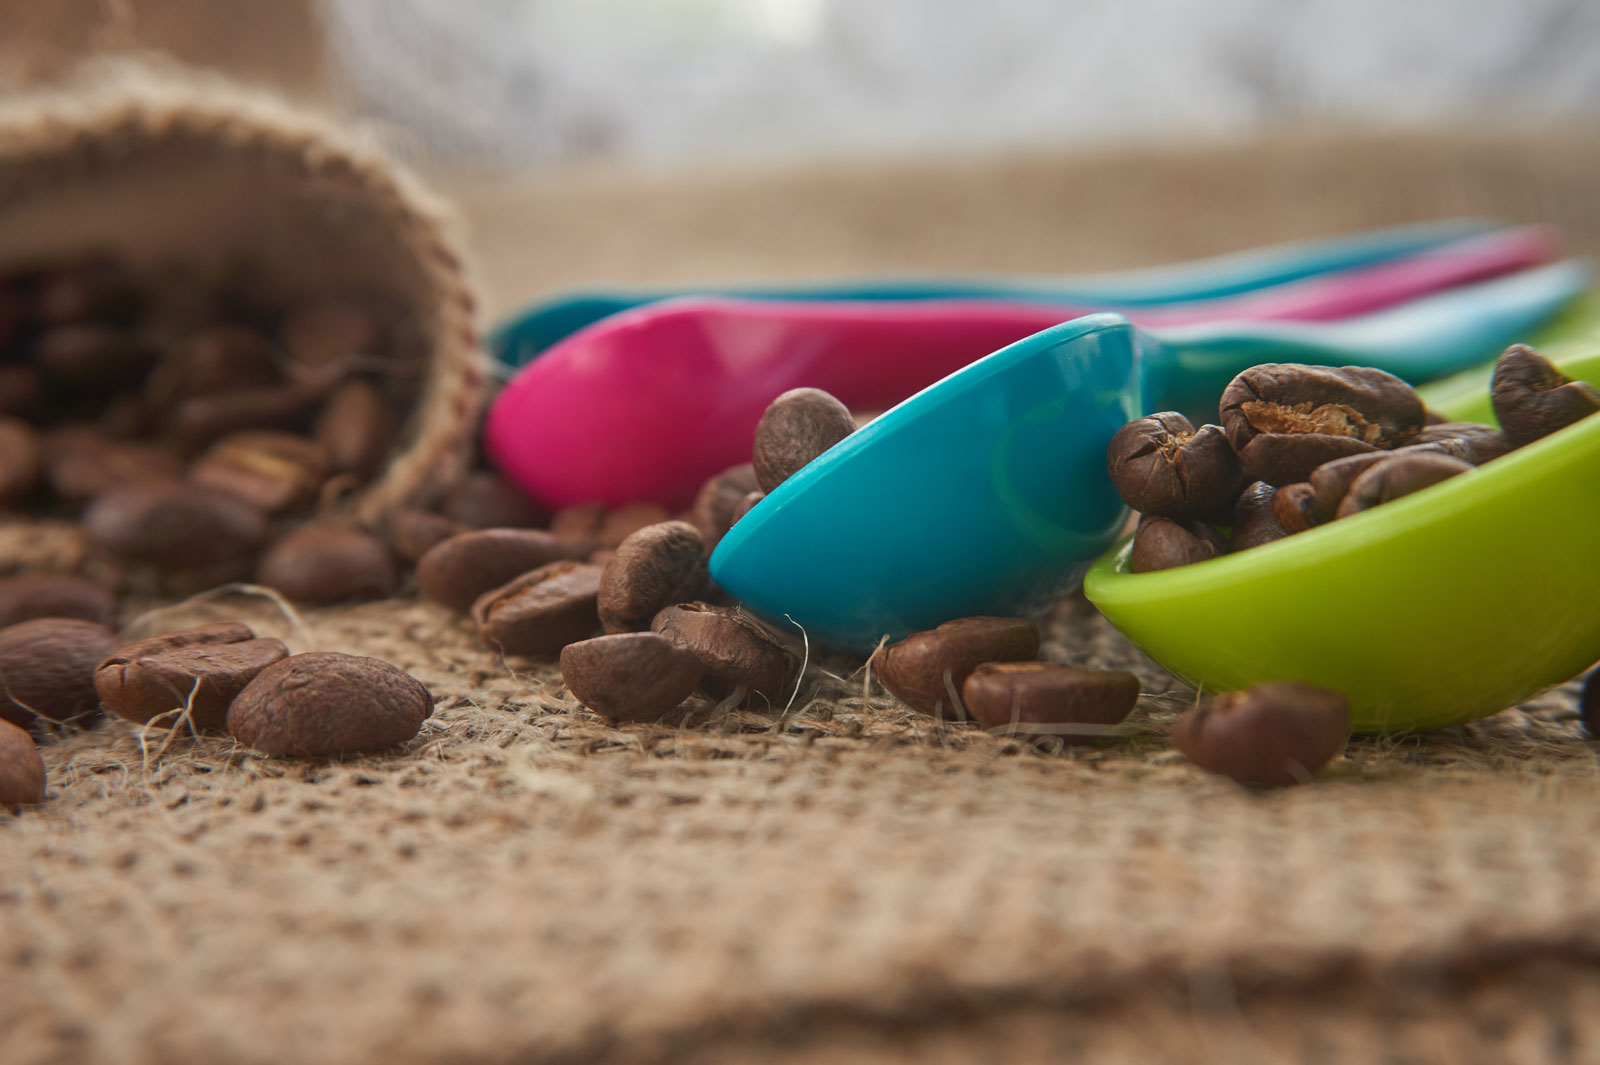 image of plastic cups of coffee beans